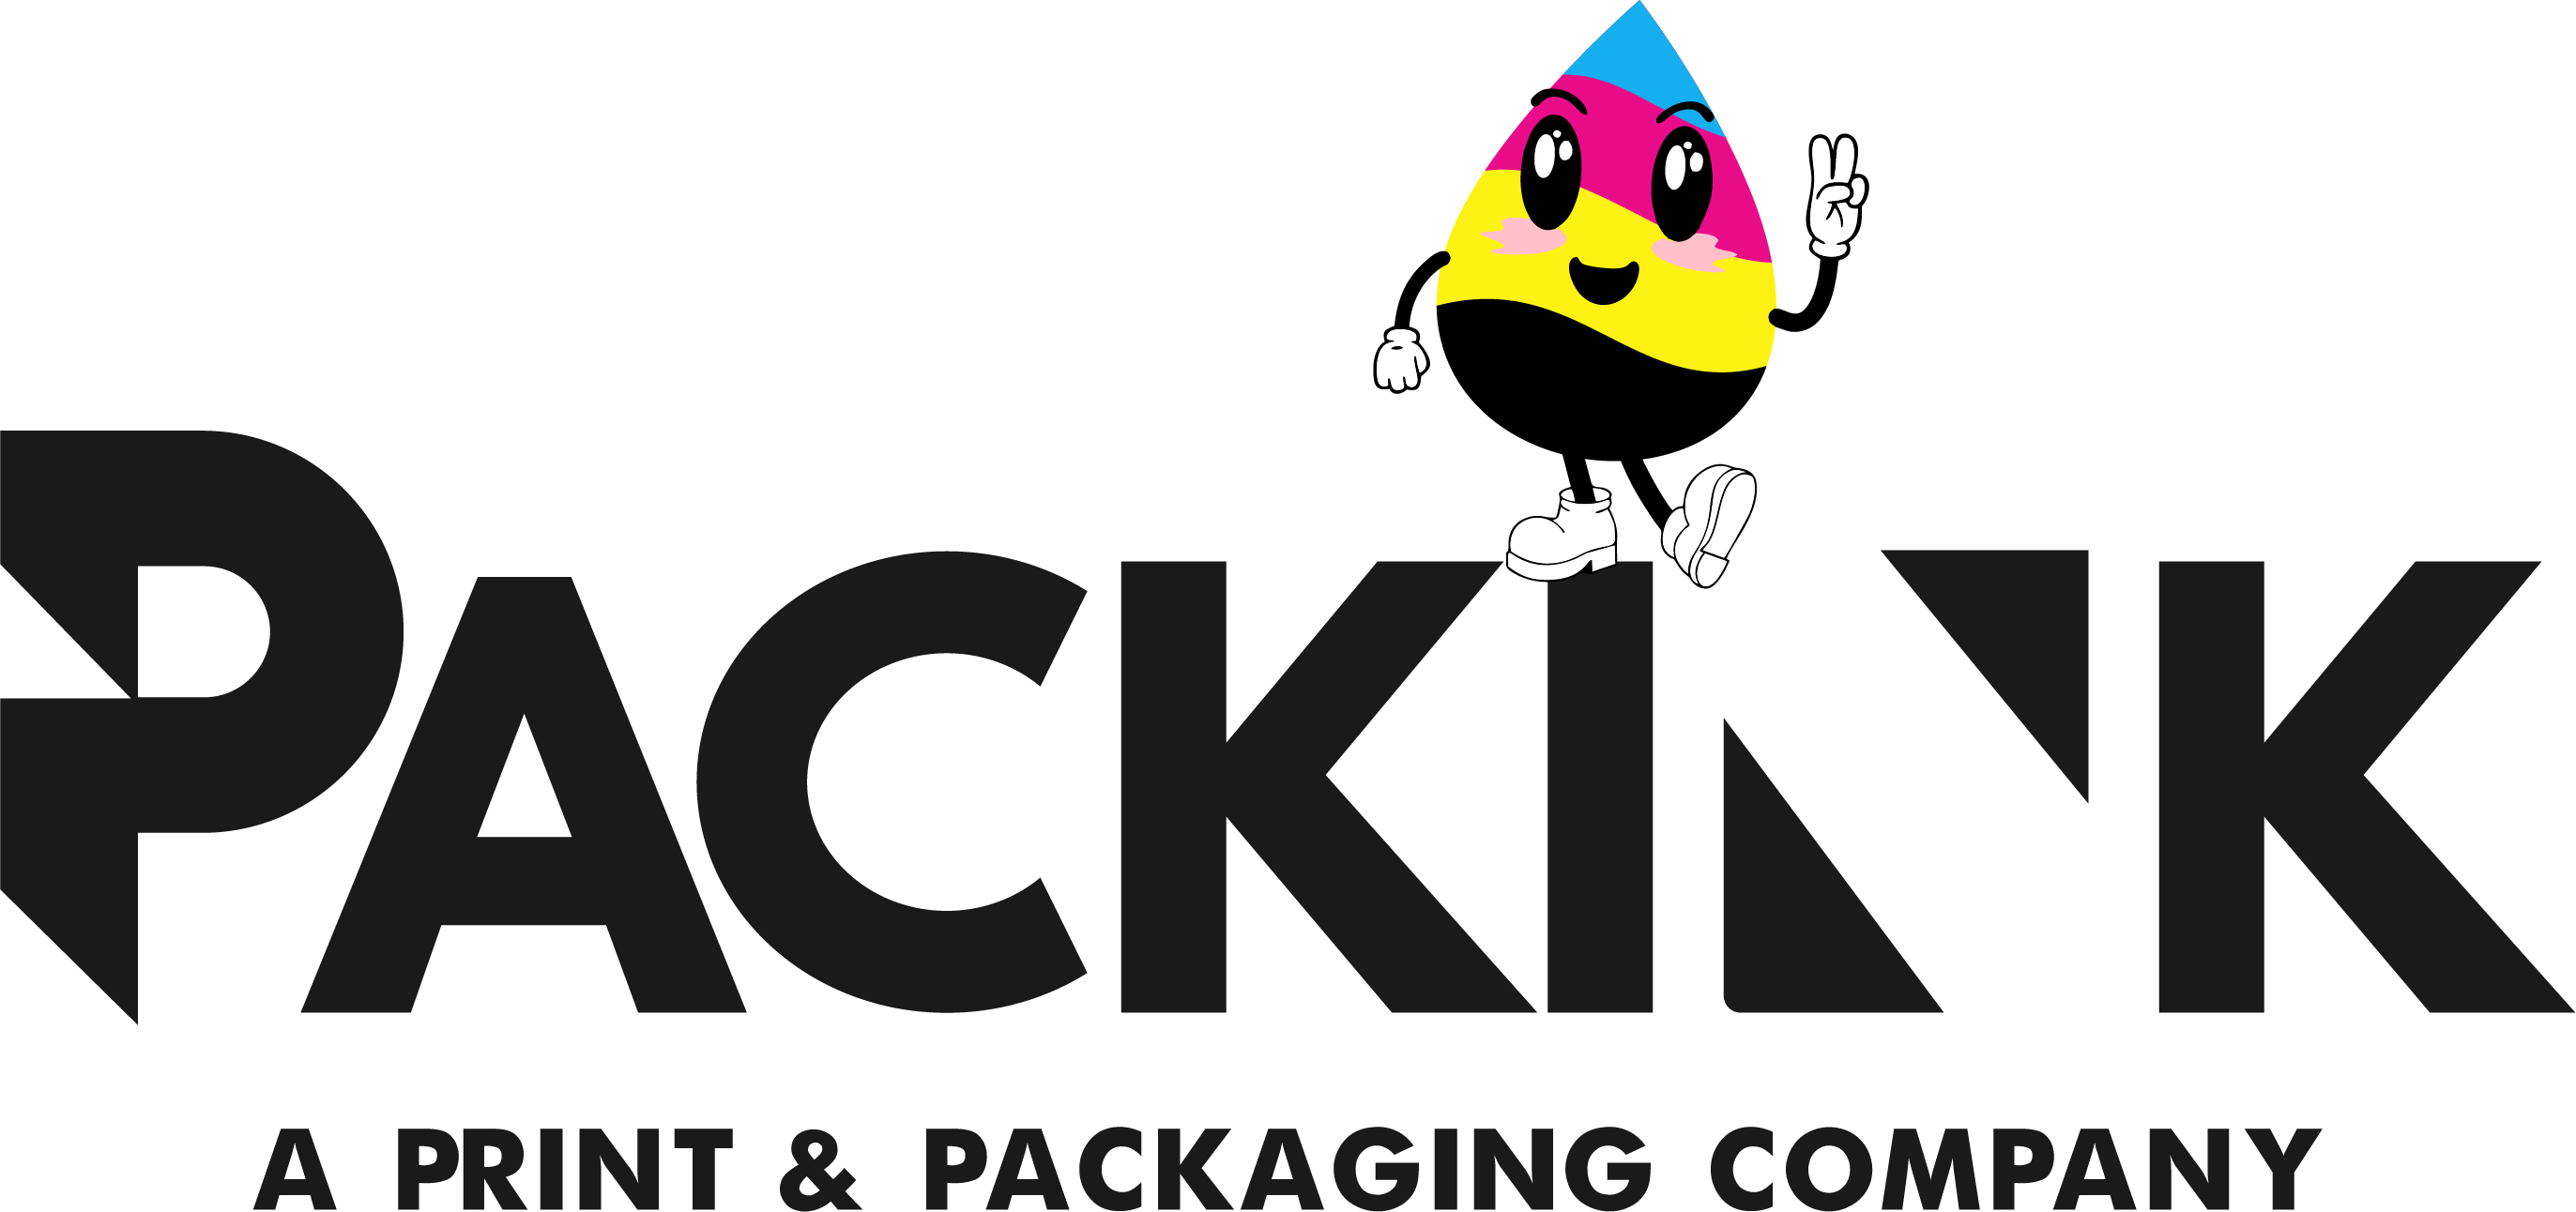 Packink